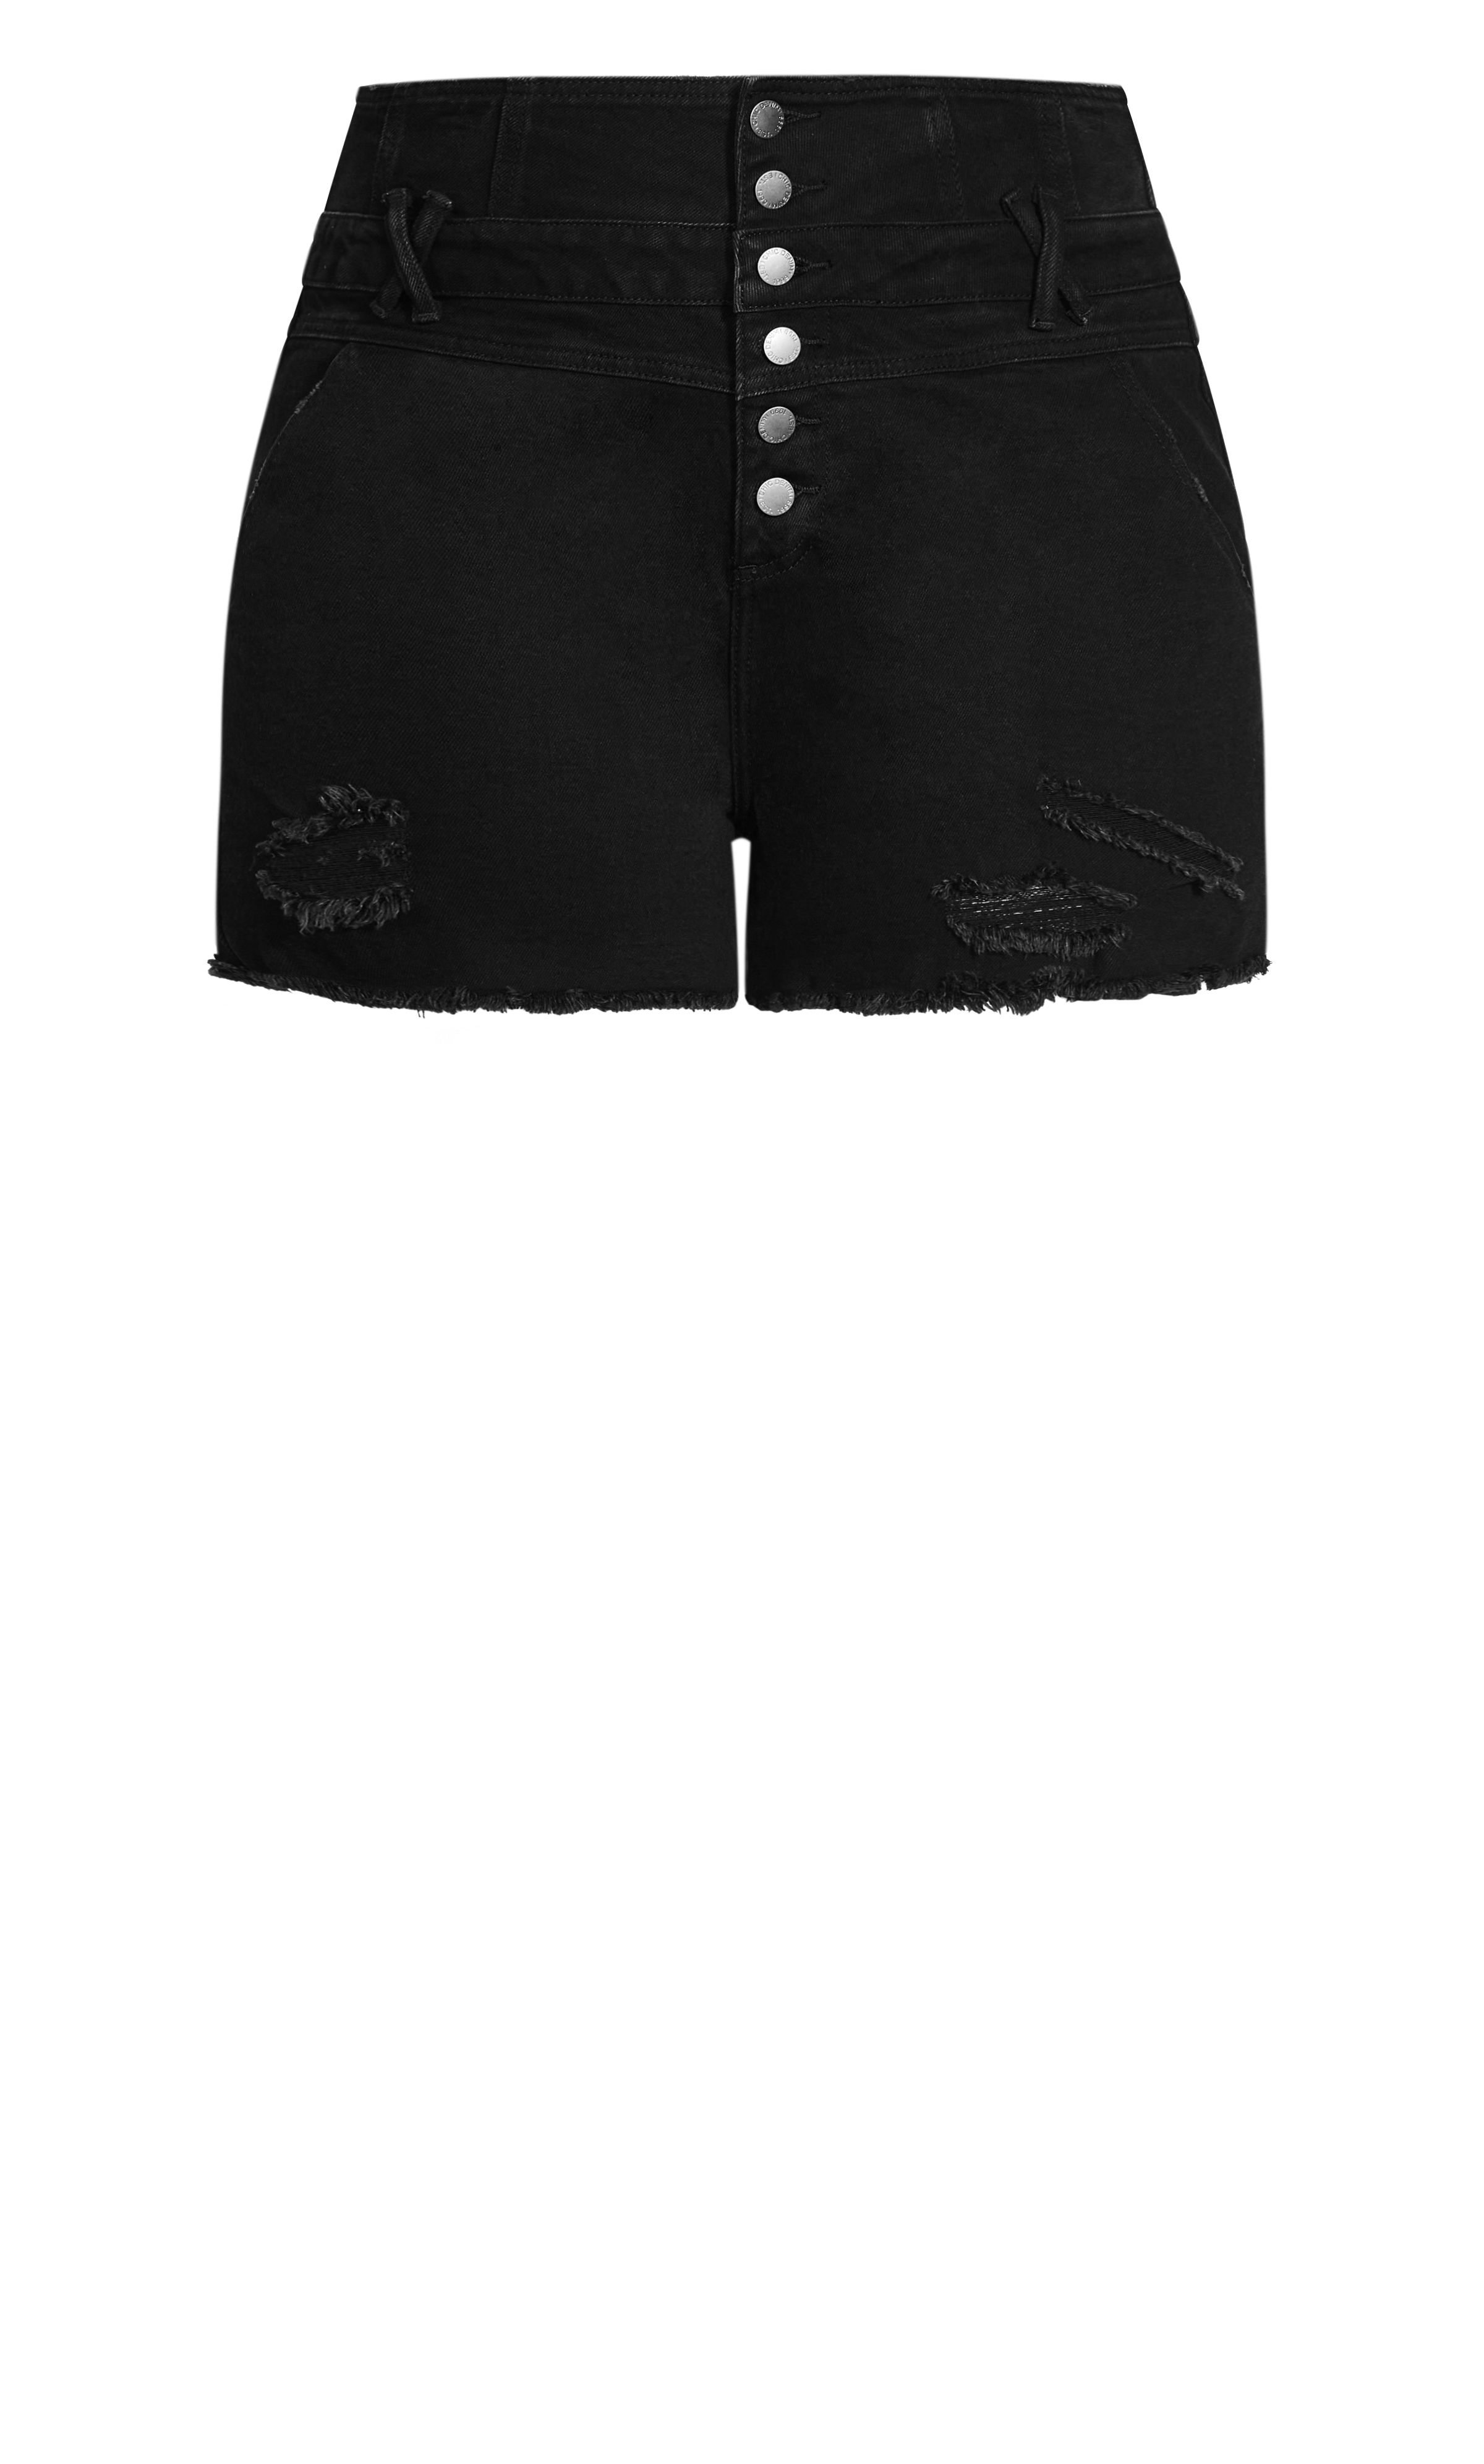 Our most flattering denim shorts have arrived! The Corset Waist Short brings style and edge to any summer wardrobe, rocking a fabulously frayed hem and trendy distressed detail. Finished in a high waist corset design, these shorts will cinch your waist to perfection. Key Features Include: - High rise - Fitted corset waistband - Four pocket denim styling - Six button closure - Belt loops - Signature Chic Denim hardware - 360 Technology stretch denim - High denim fibre retention to maintain shape - Distressed detail - Frayed hemline Take from day wear to party wear with a simple swap of top and shoes! For sunny strolls, add a slogan tee and sneakers; for late nights bar-hopping, style with a cold shoulder blouse and some minimalist heels.